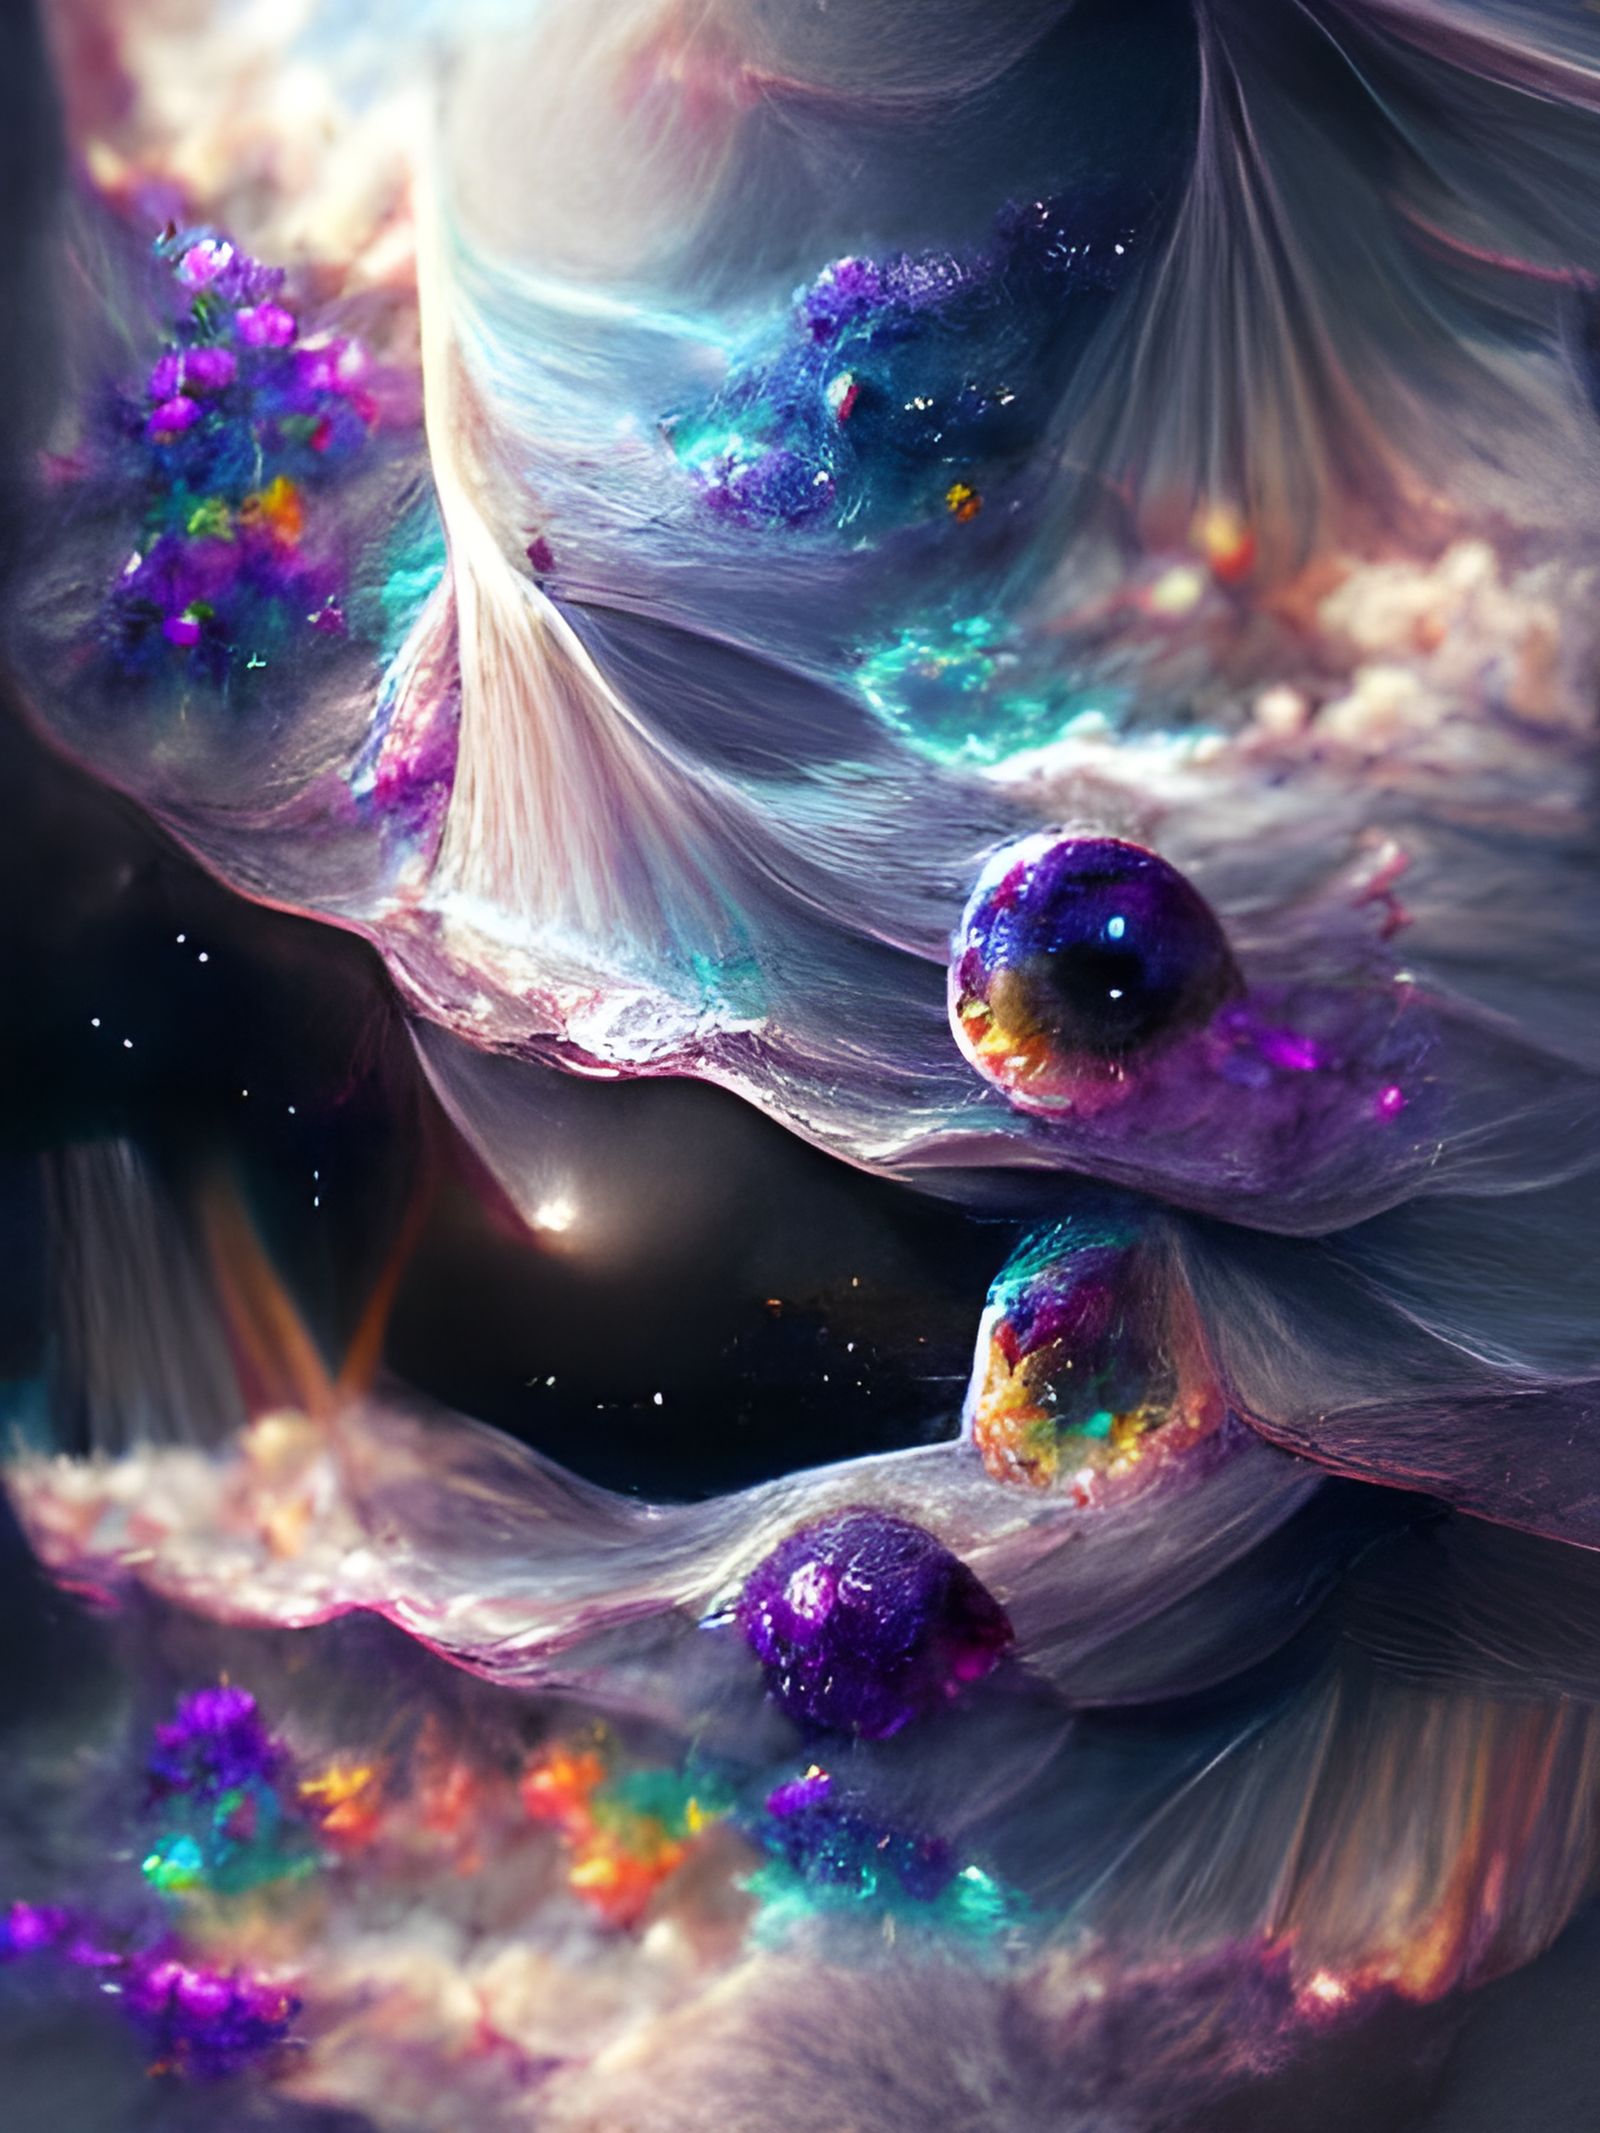  Fabric of the Universe